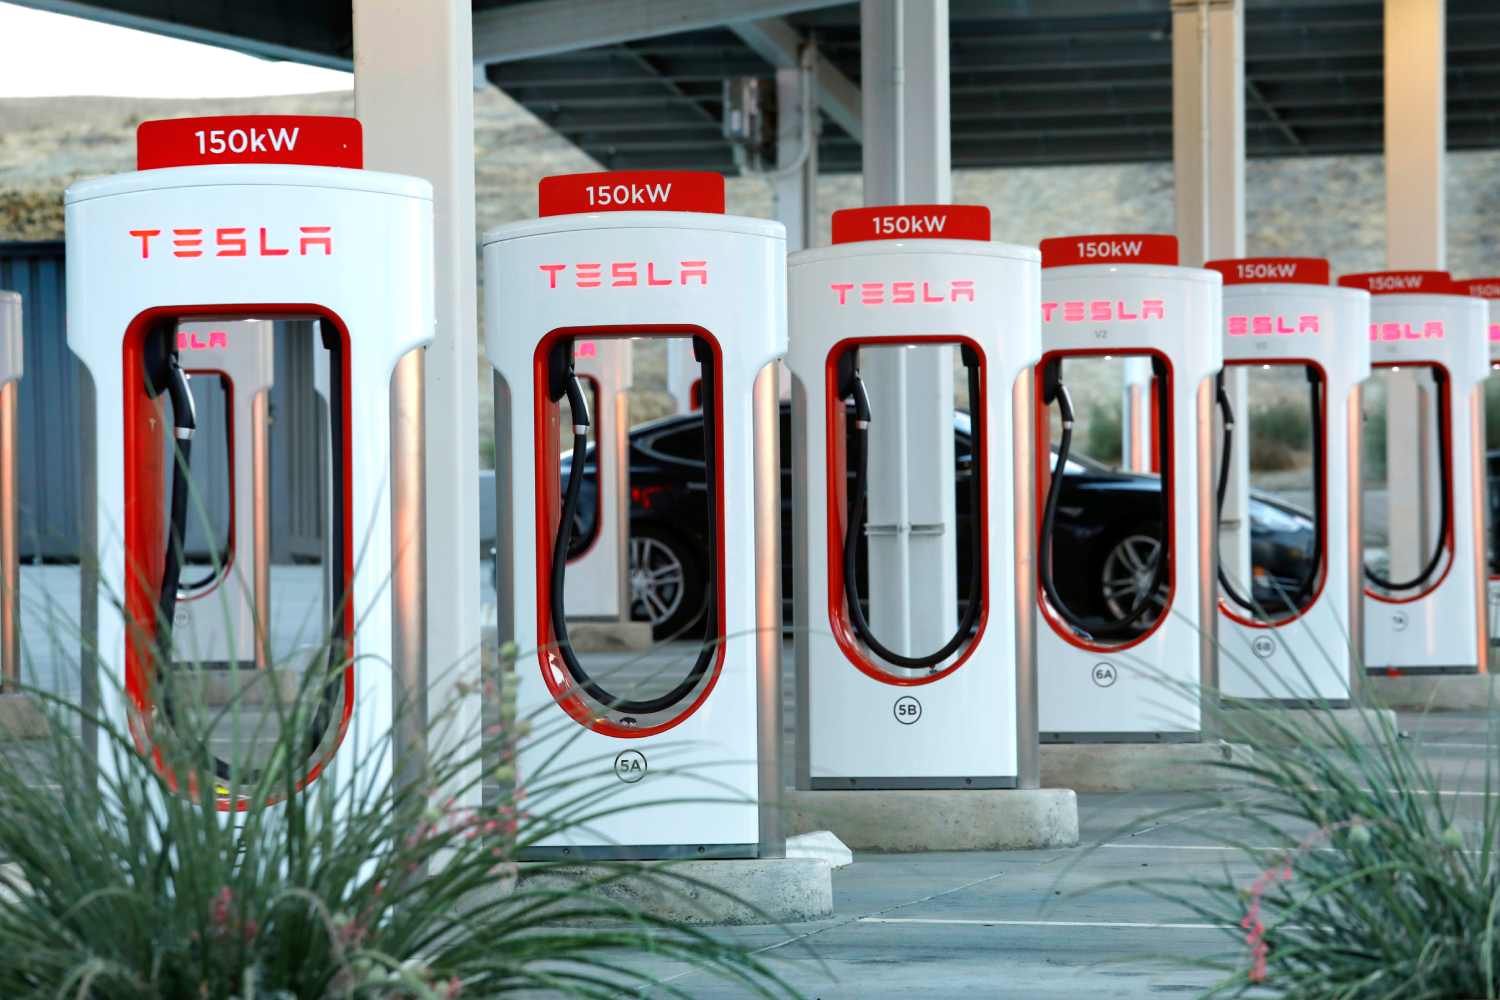 The Tesla Supercharging Experience Guide